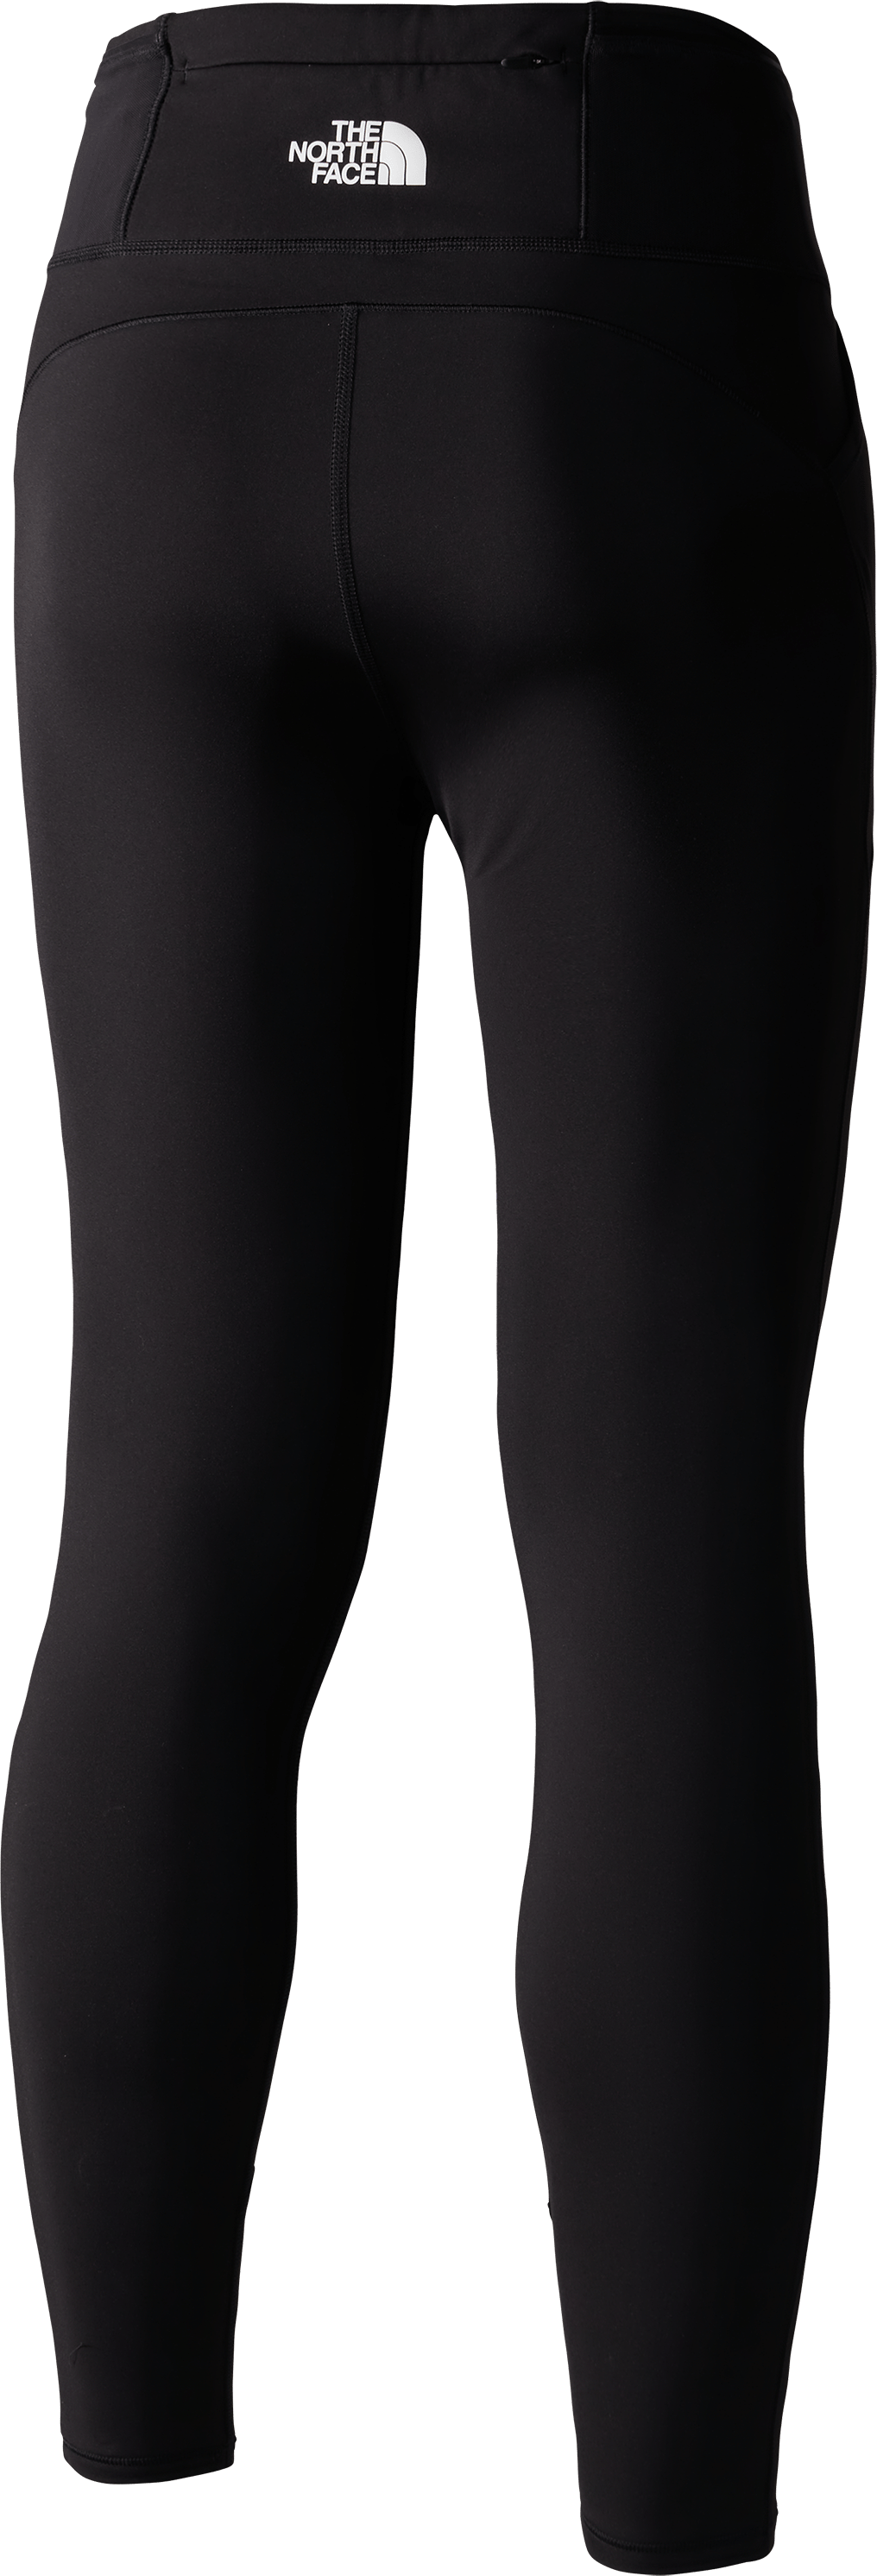 The North Face Black Winter Warm Leggings The North Face